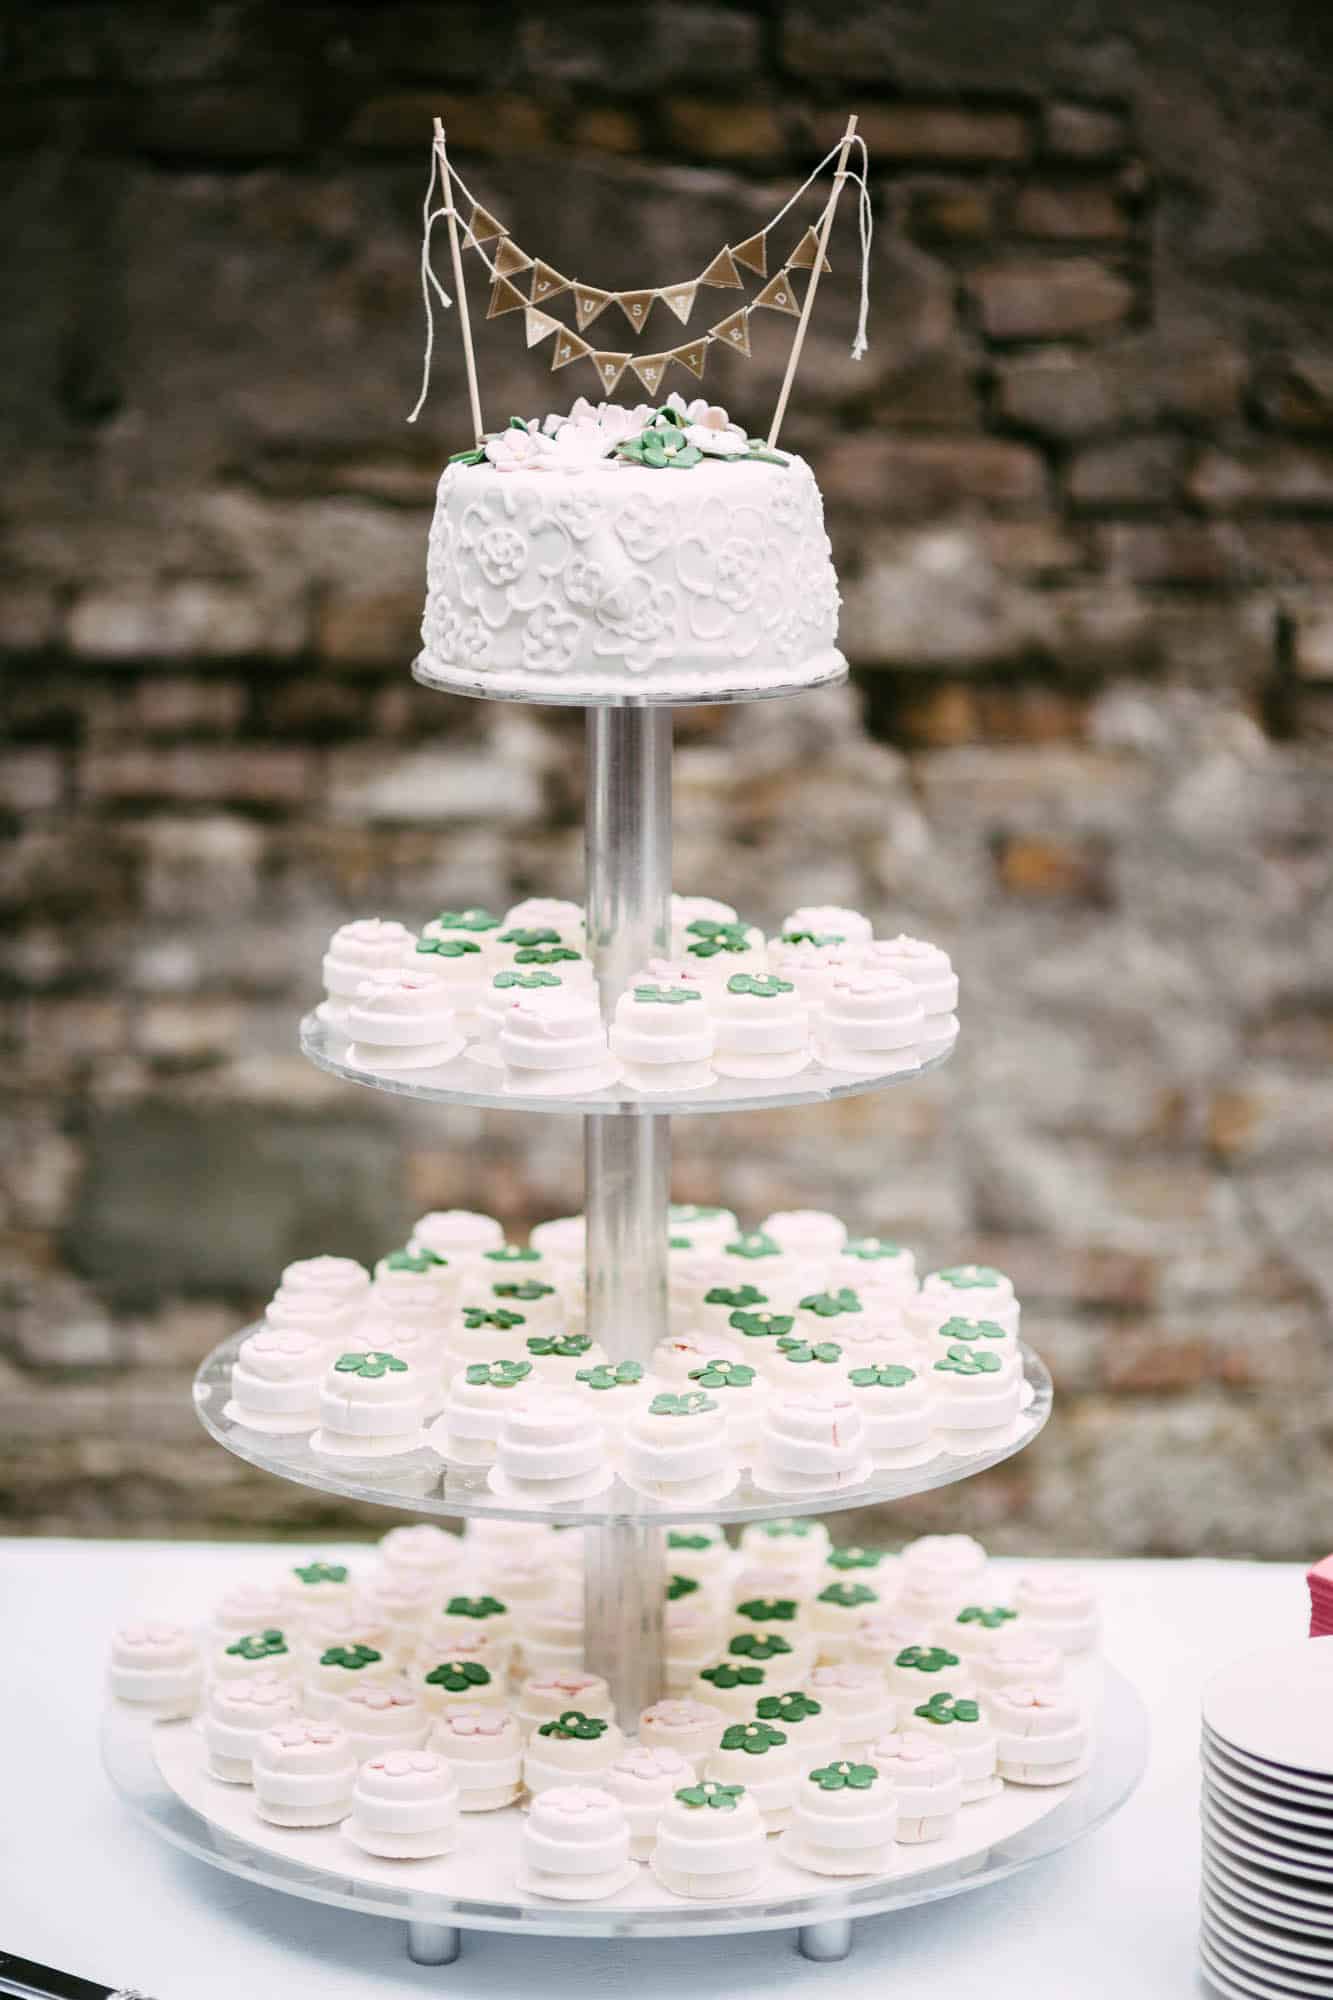 A three-tier cake decorated with green and white wedding cakes.